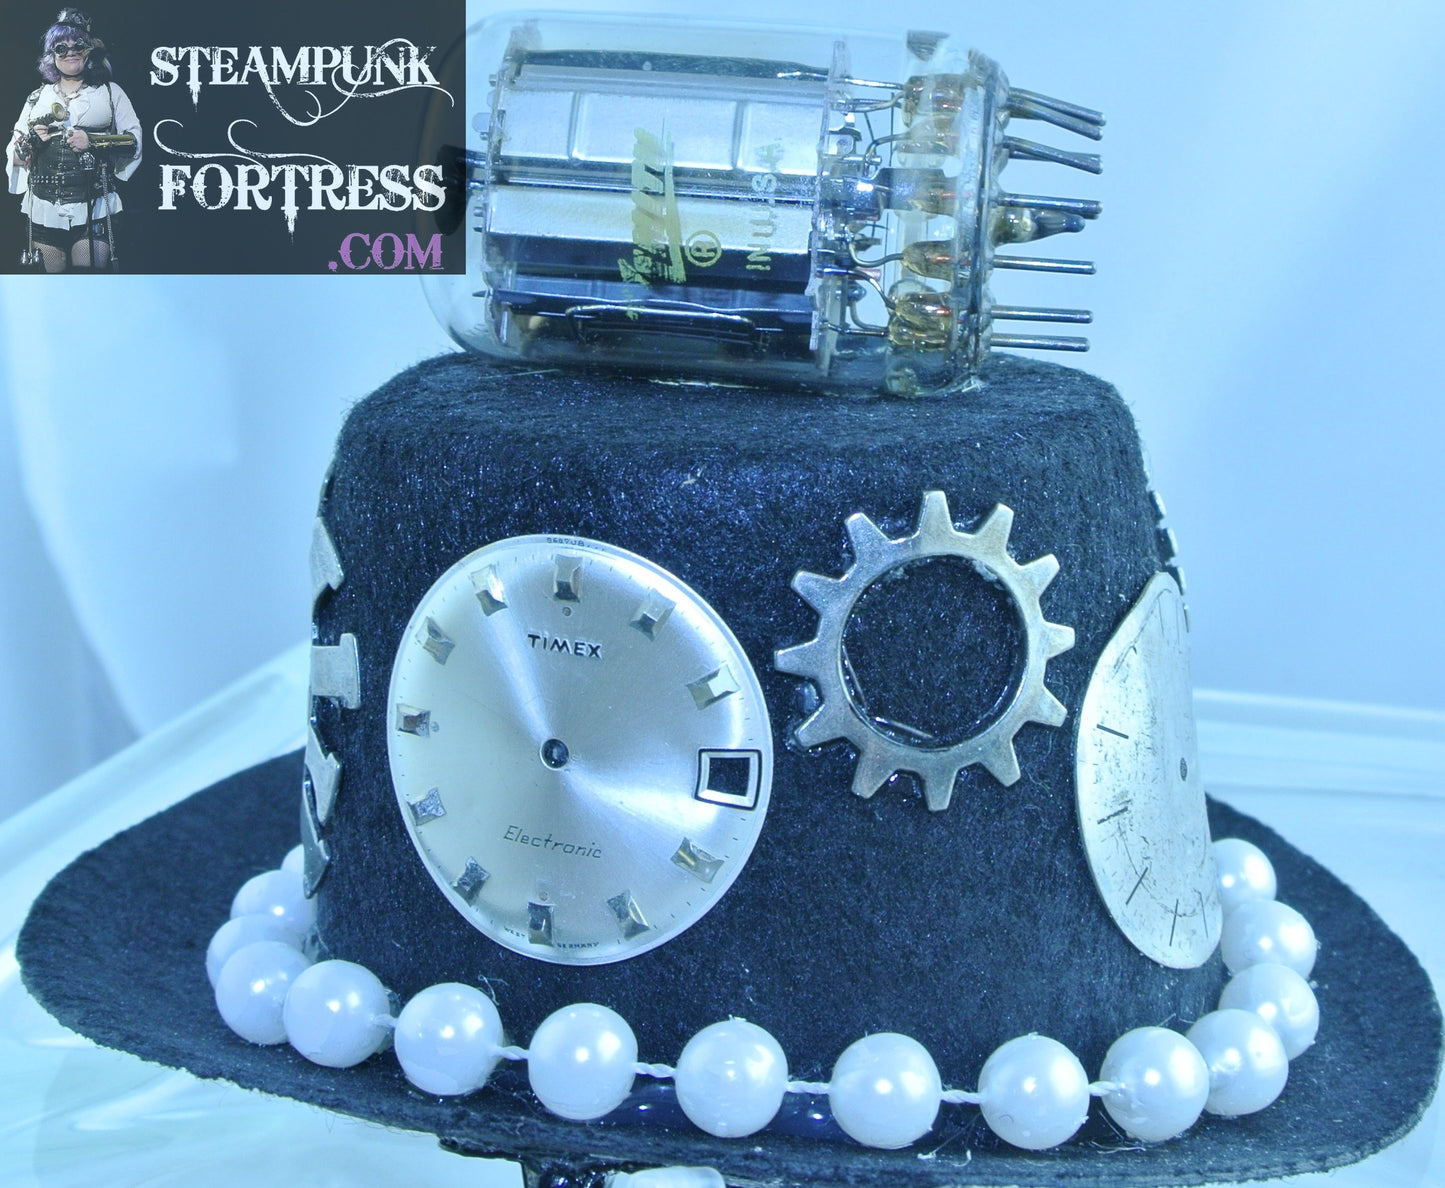 BLACK 3 SILVER CLOCK WATCH FACES DIALS 2 XL EXTRA LARGE GEARS GEAR PEARL BAND ROCKET TOP XS EXTRA SMALL MINI TOP HAT STARR WILDE STEAMPUNK FORTRESS